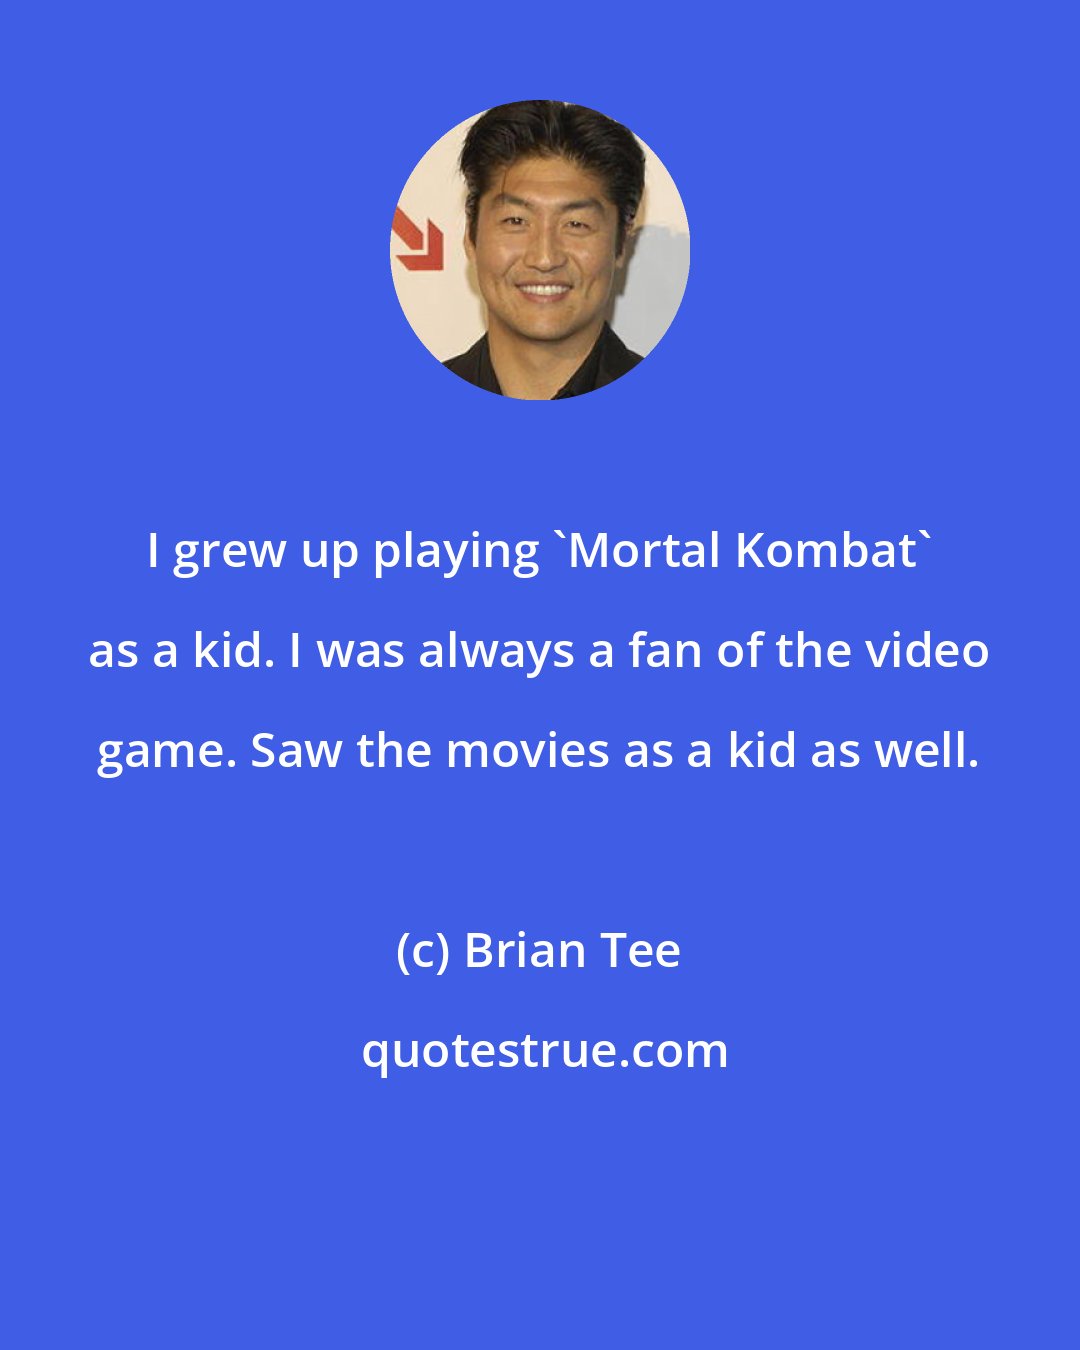 Brian Tee: I grew up playing 'Mortal Kombat' as a kid. I was always a fan of the video game. Saw the movies as a kid as well.